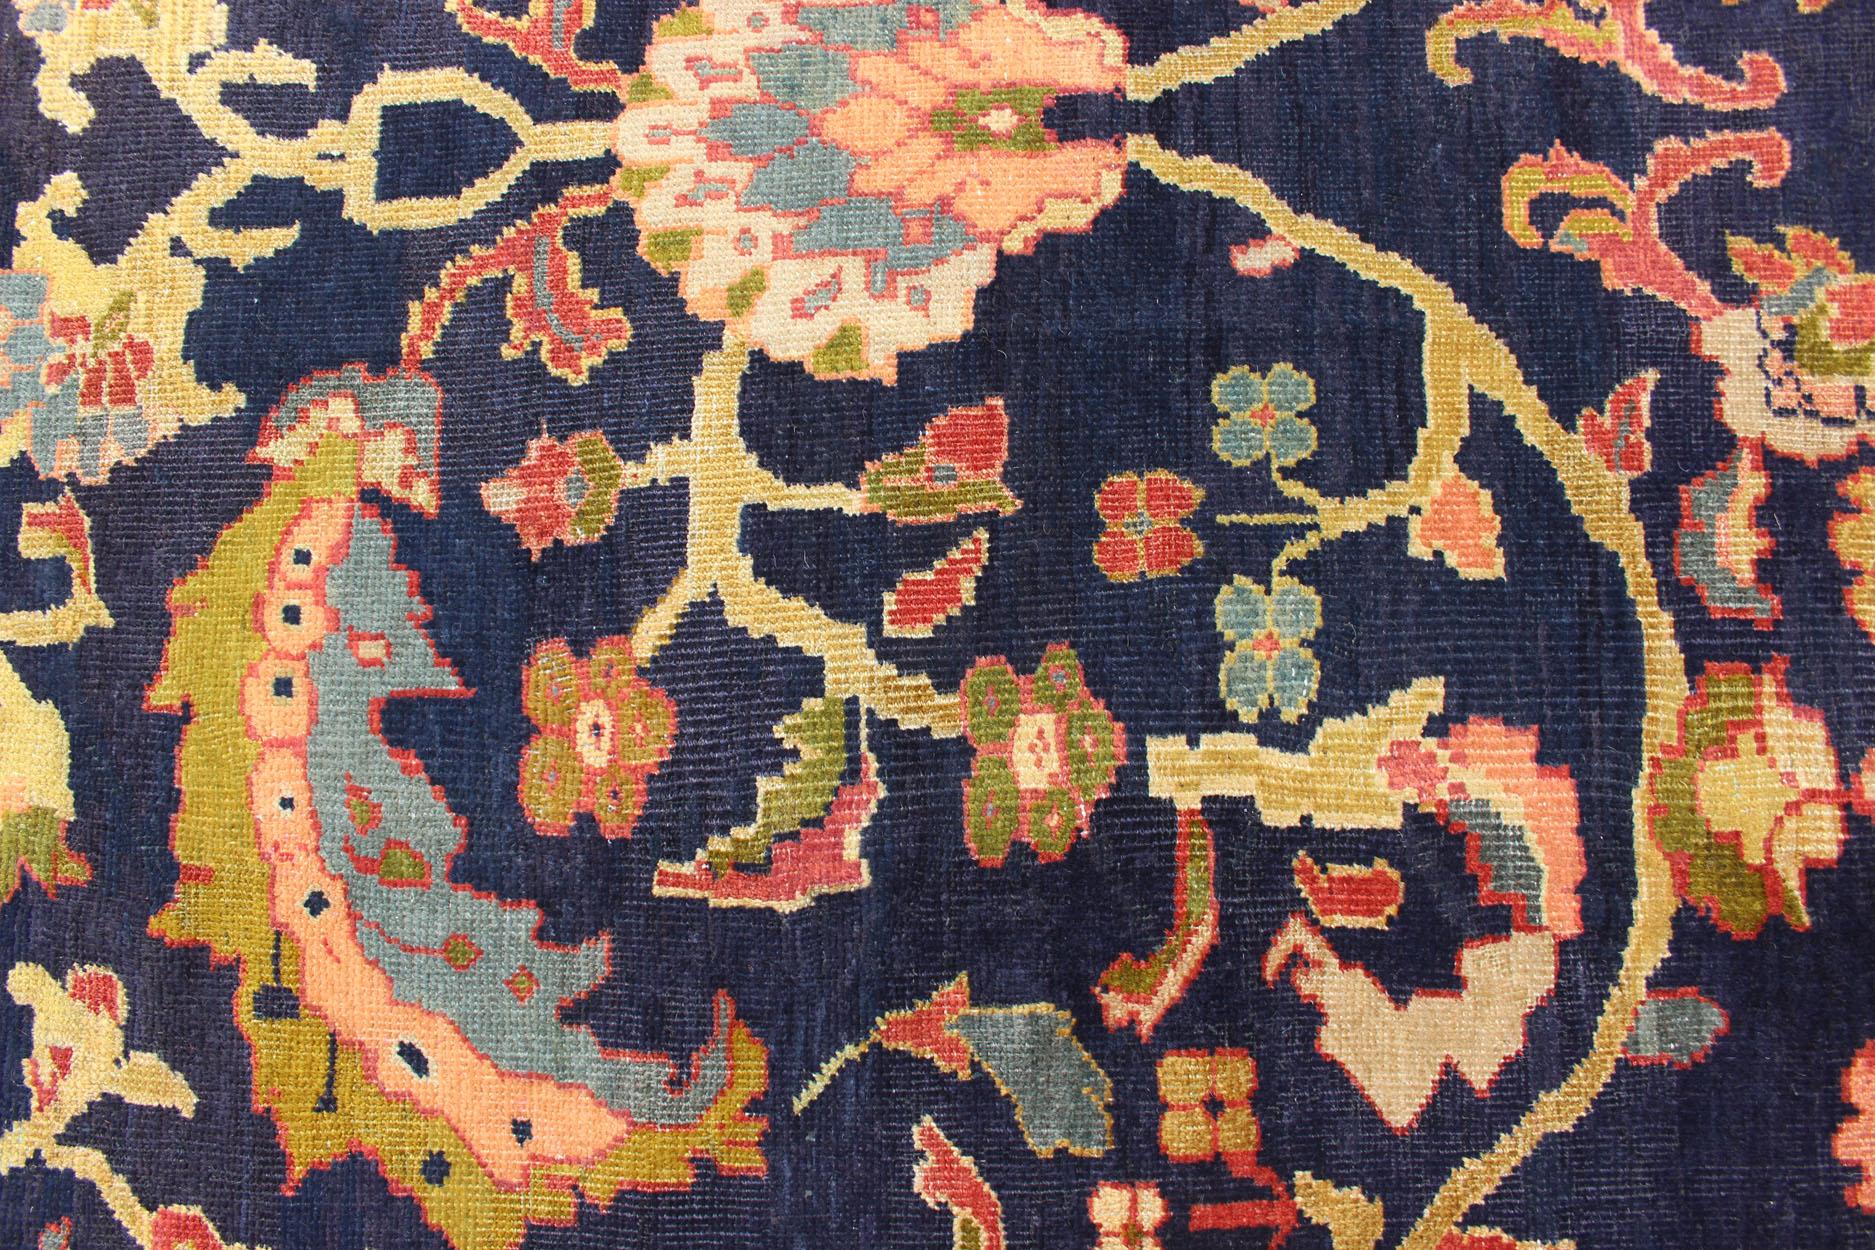  Antique Persian Sultanabad Carpet in Navy Blue Background and Rose Red Border  For Sale 1